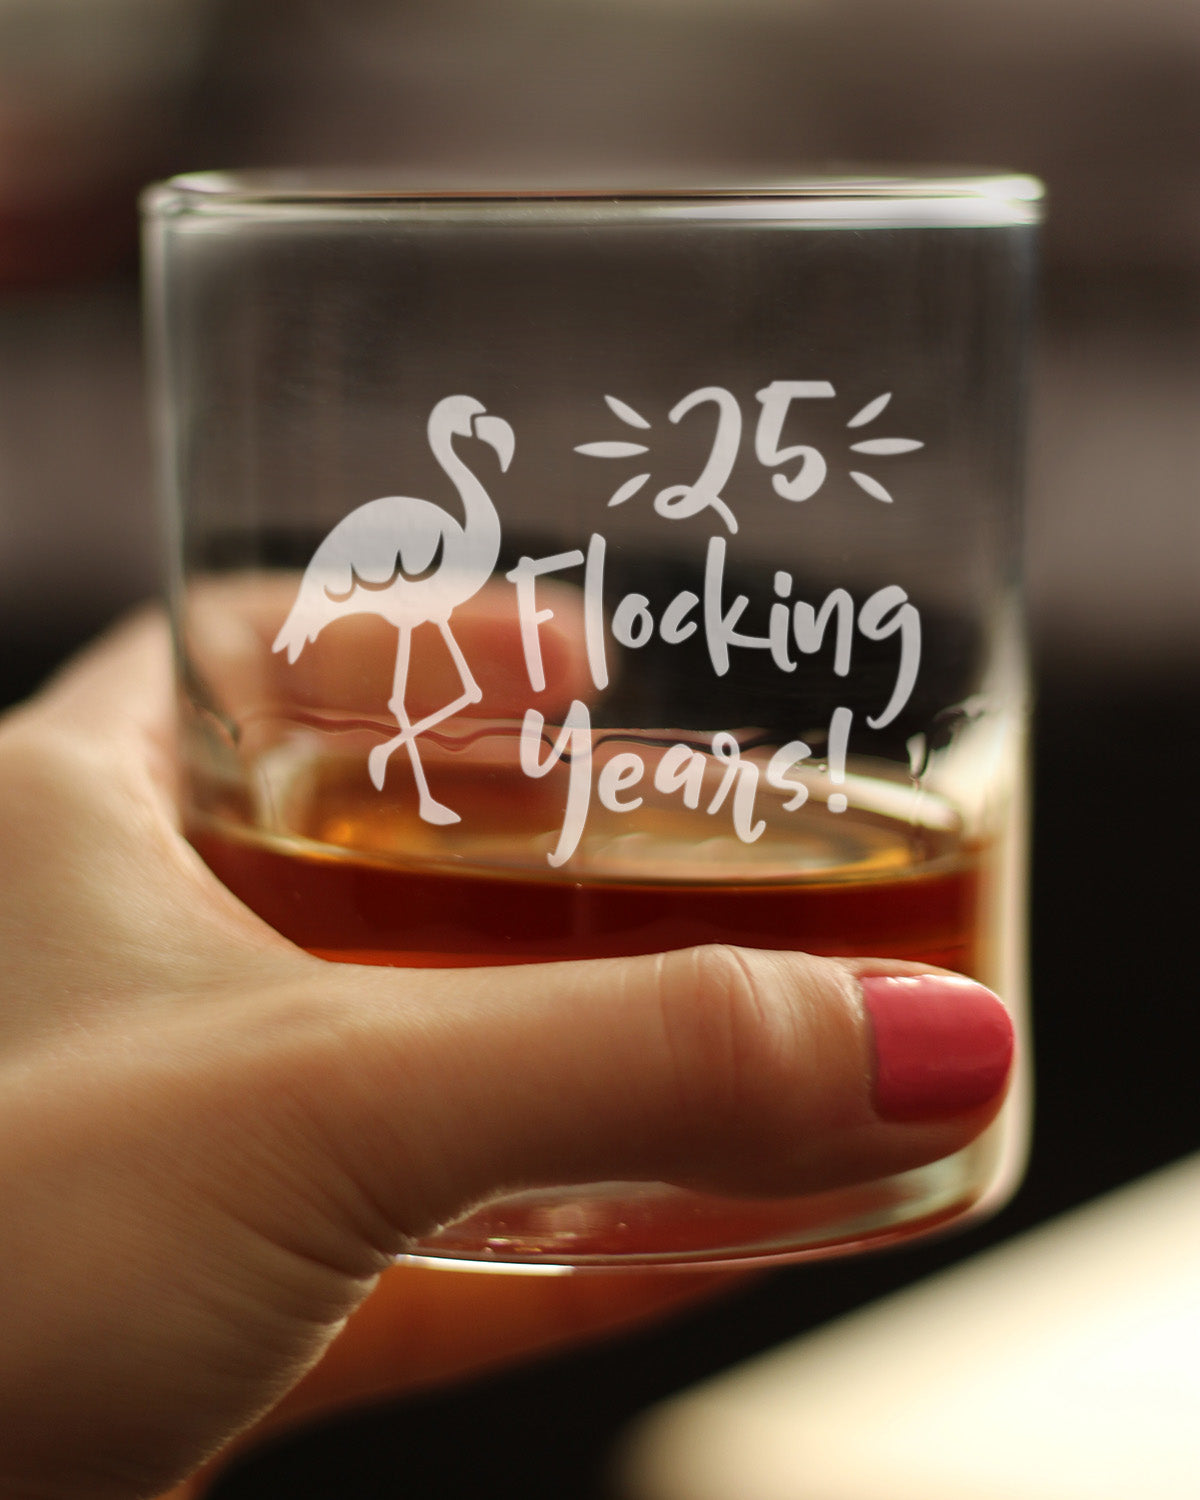 25 Flocking Years 10 oz Rocks Glass or Old Fashioned Glass, Etched Sayings - Cute 25th Anniversary or Birthday Gift for Flamingo Lovers